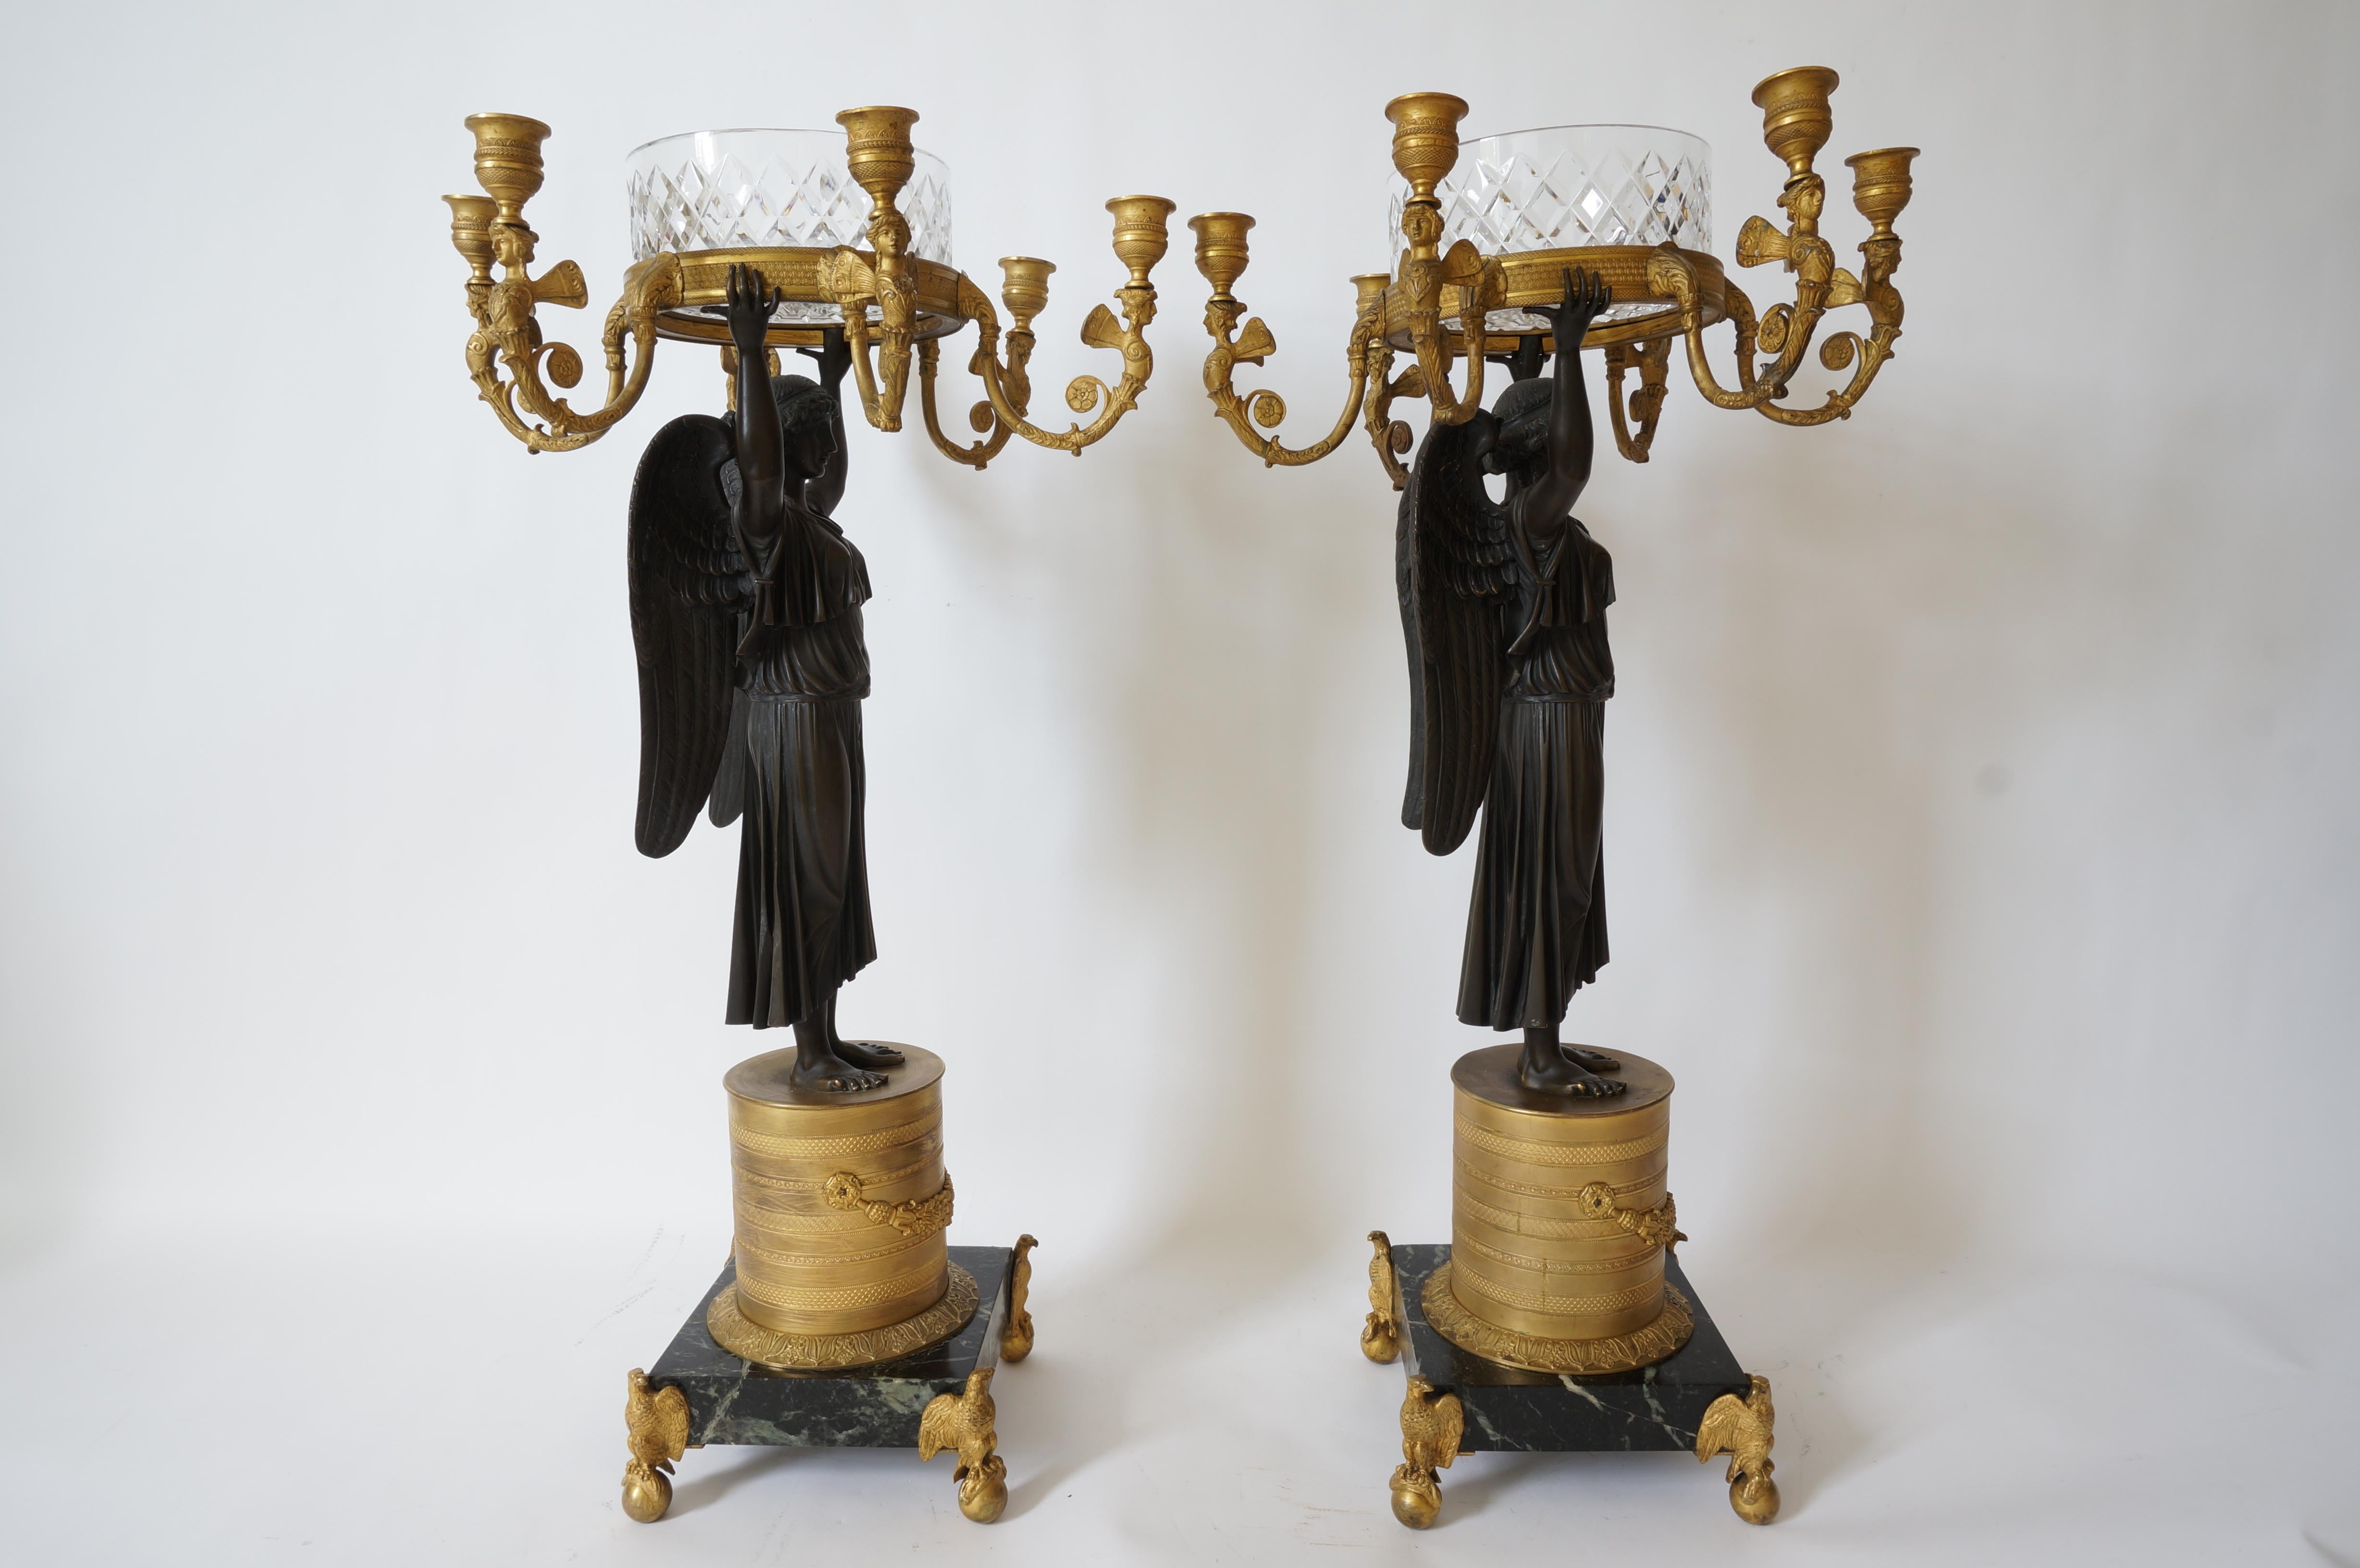 Antique Thomire style 6-candle candelabra epergne gilded and patina bronze with cut crystal bowl on dark green marble with eagle mounts from a Palm Beach estate. Palatial scope, remarkable design and elegance.

Note:Pierre-Philippe Thomire a